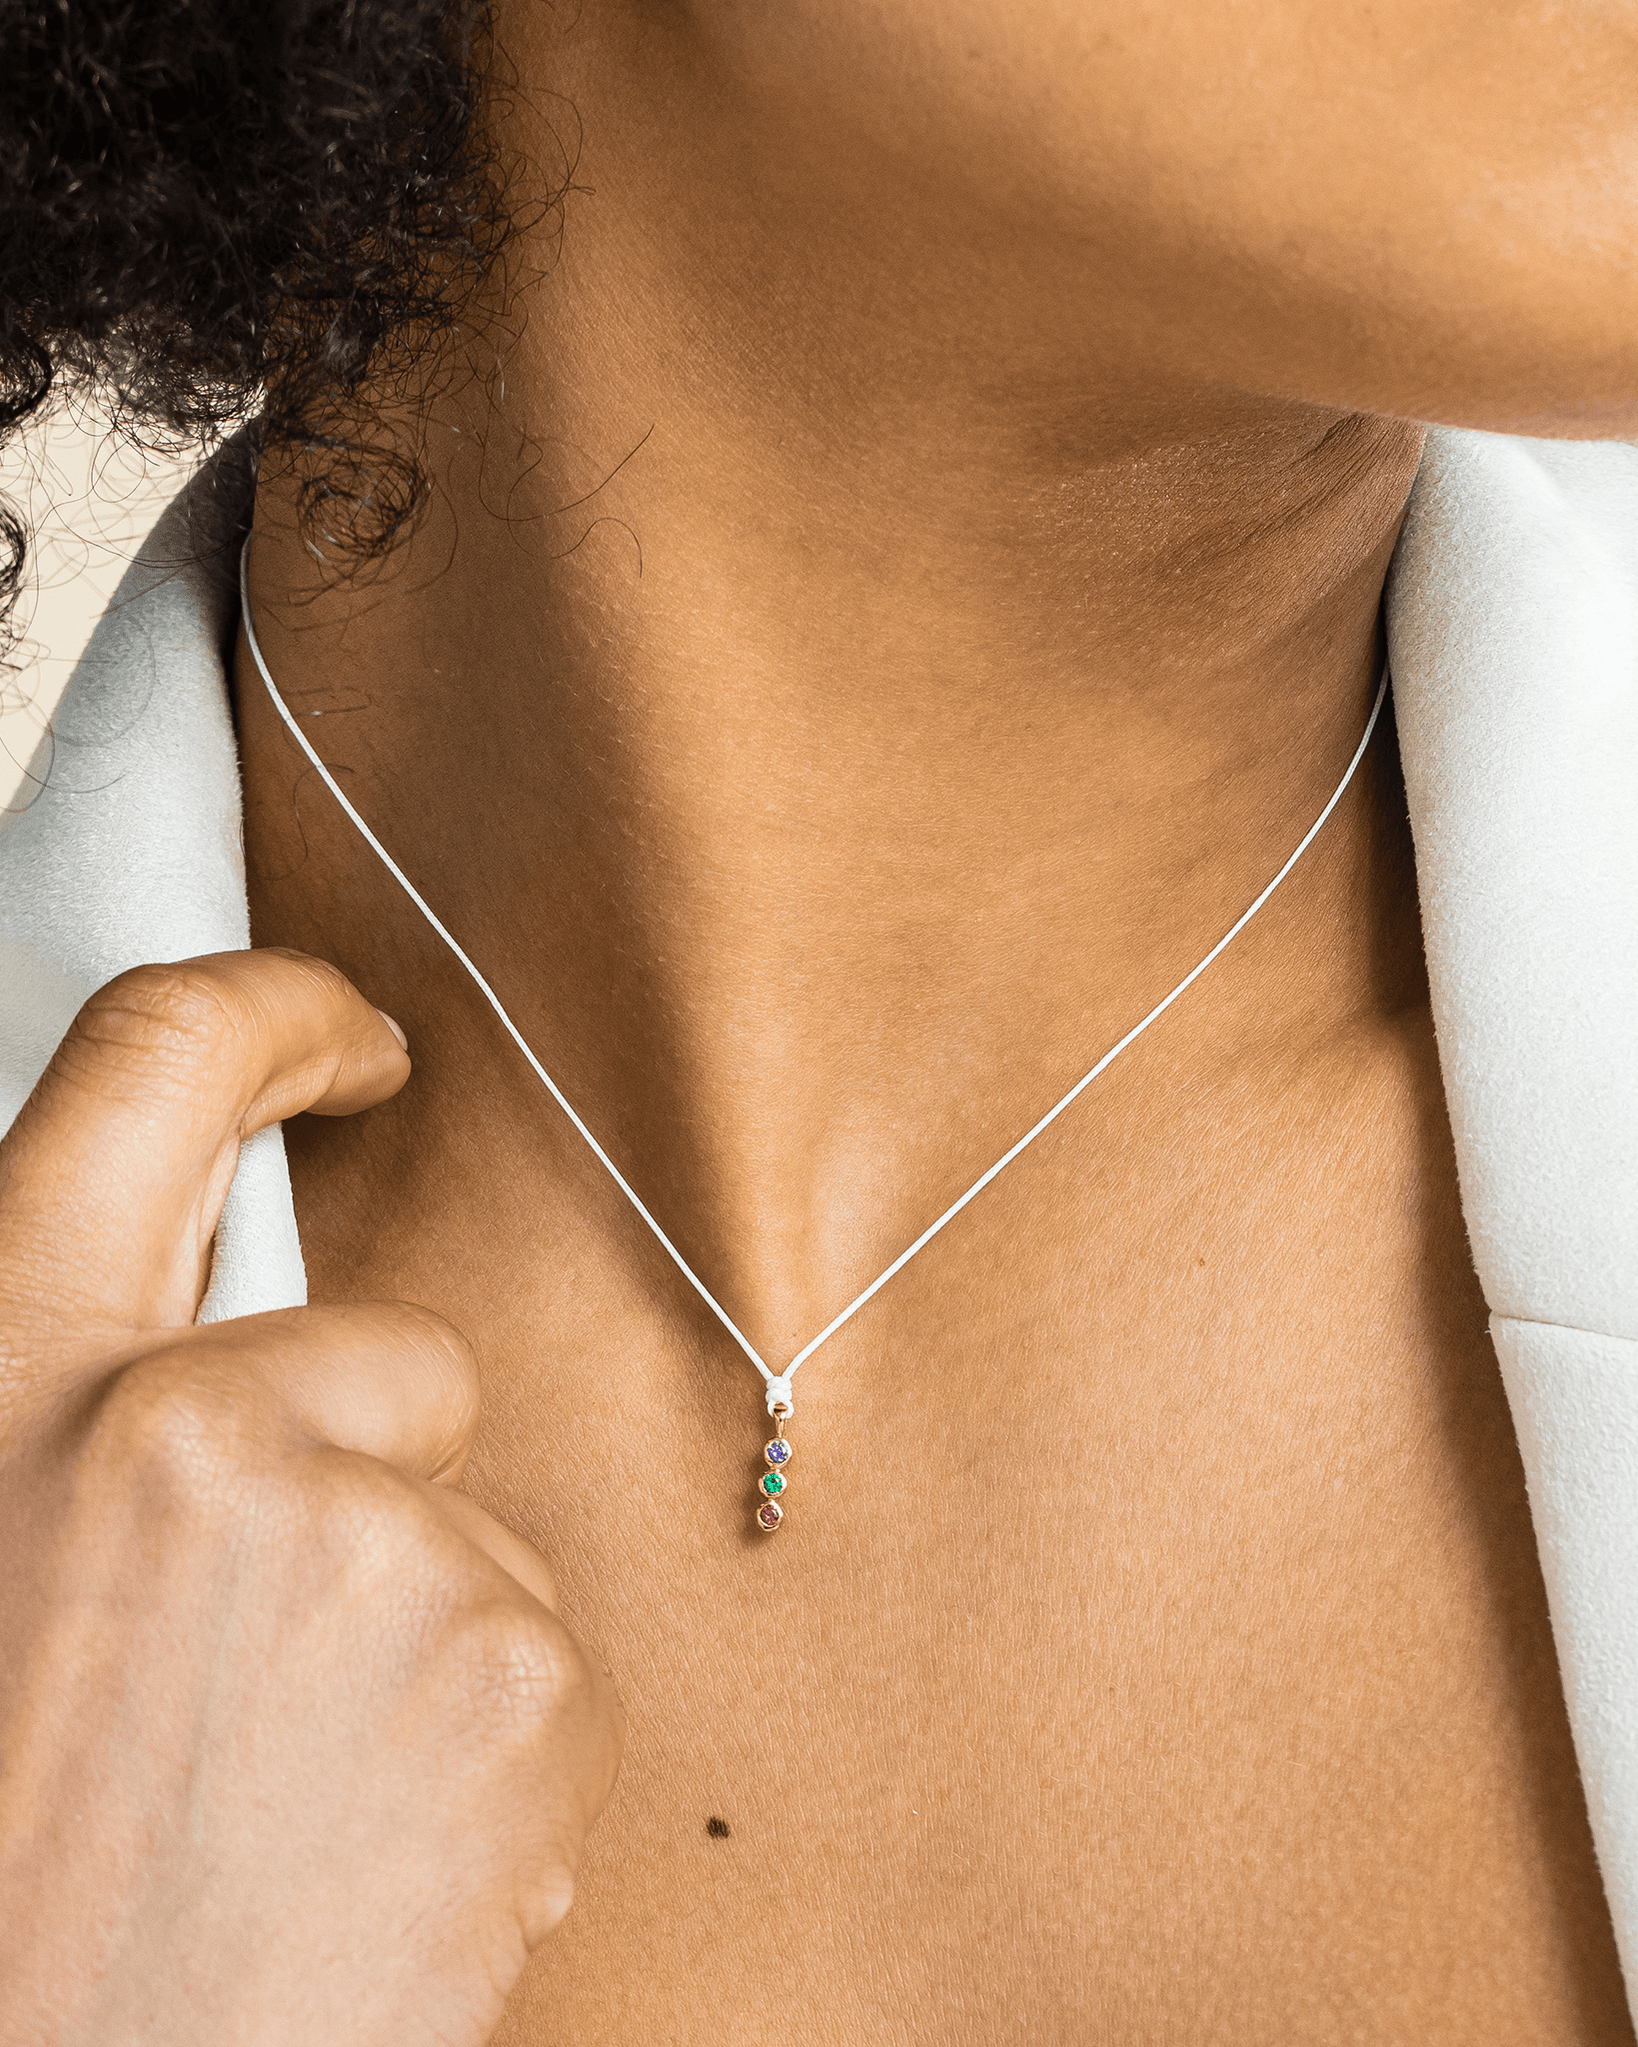 The Birthstones Bar Necklace - 14K Yellow Gold Necklaces 14K Solid Gold 